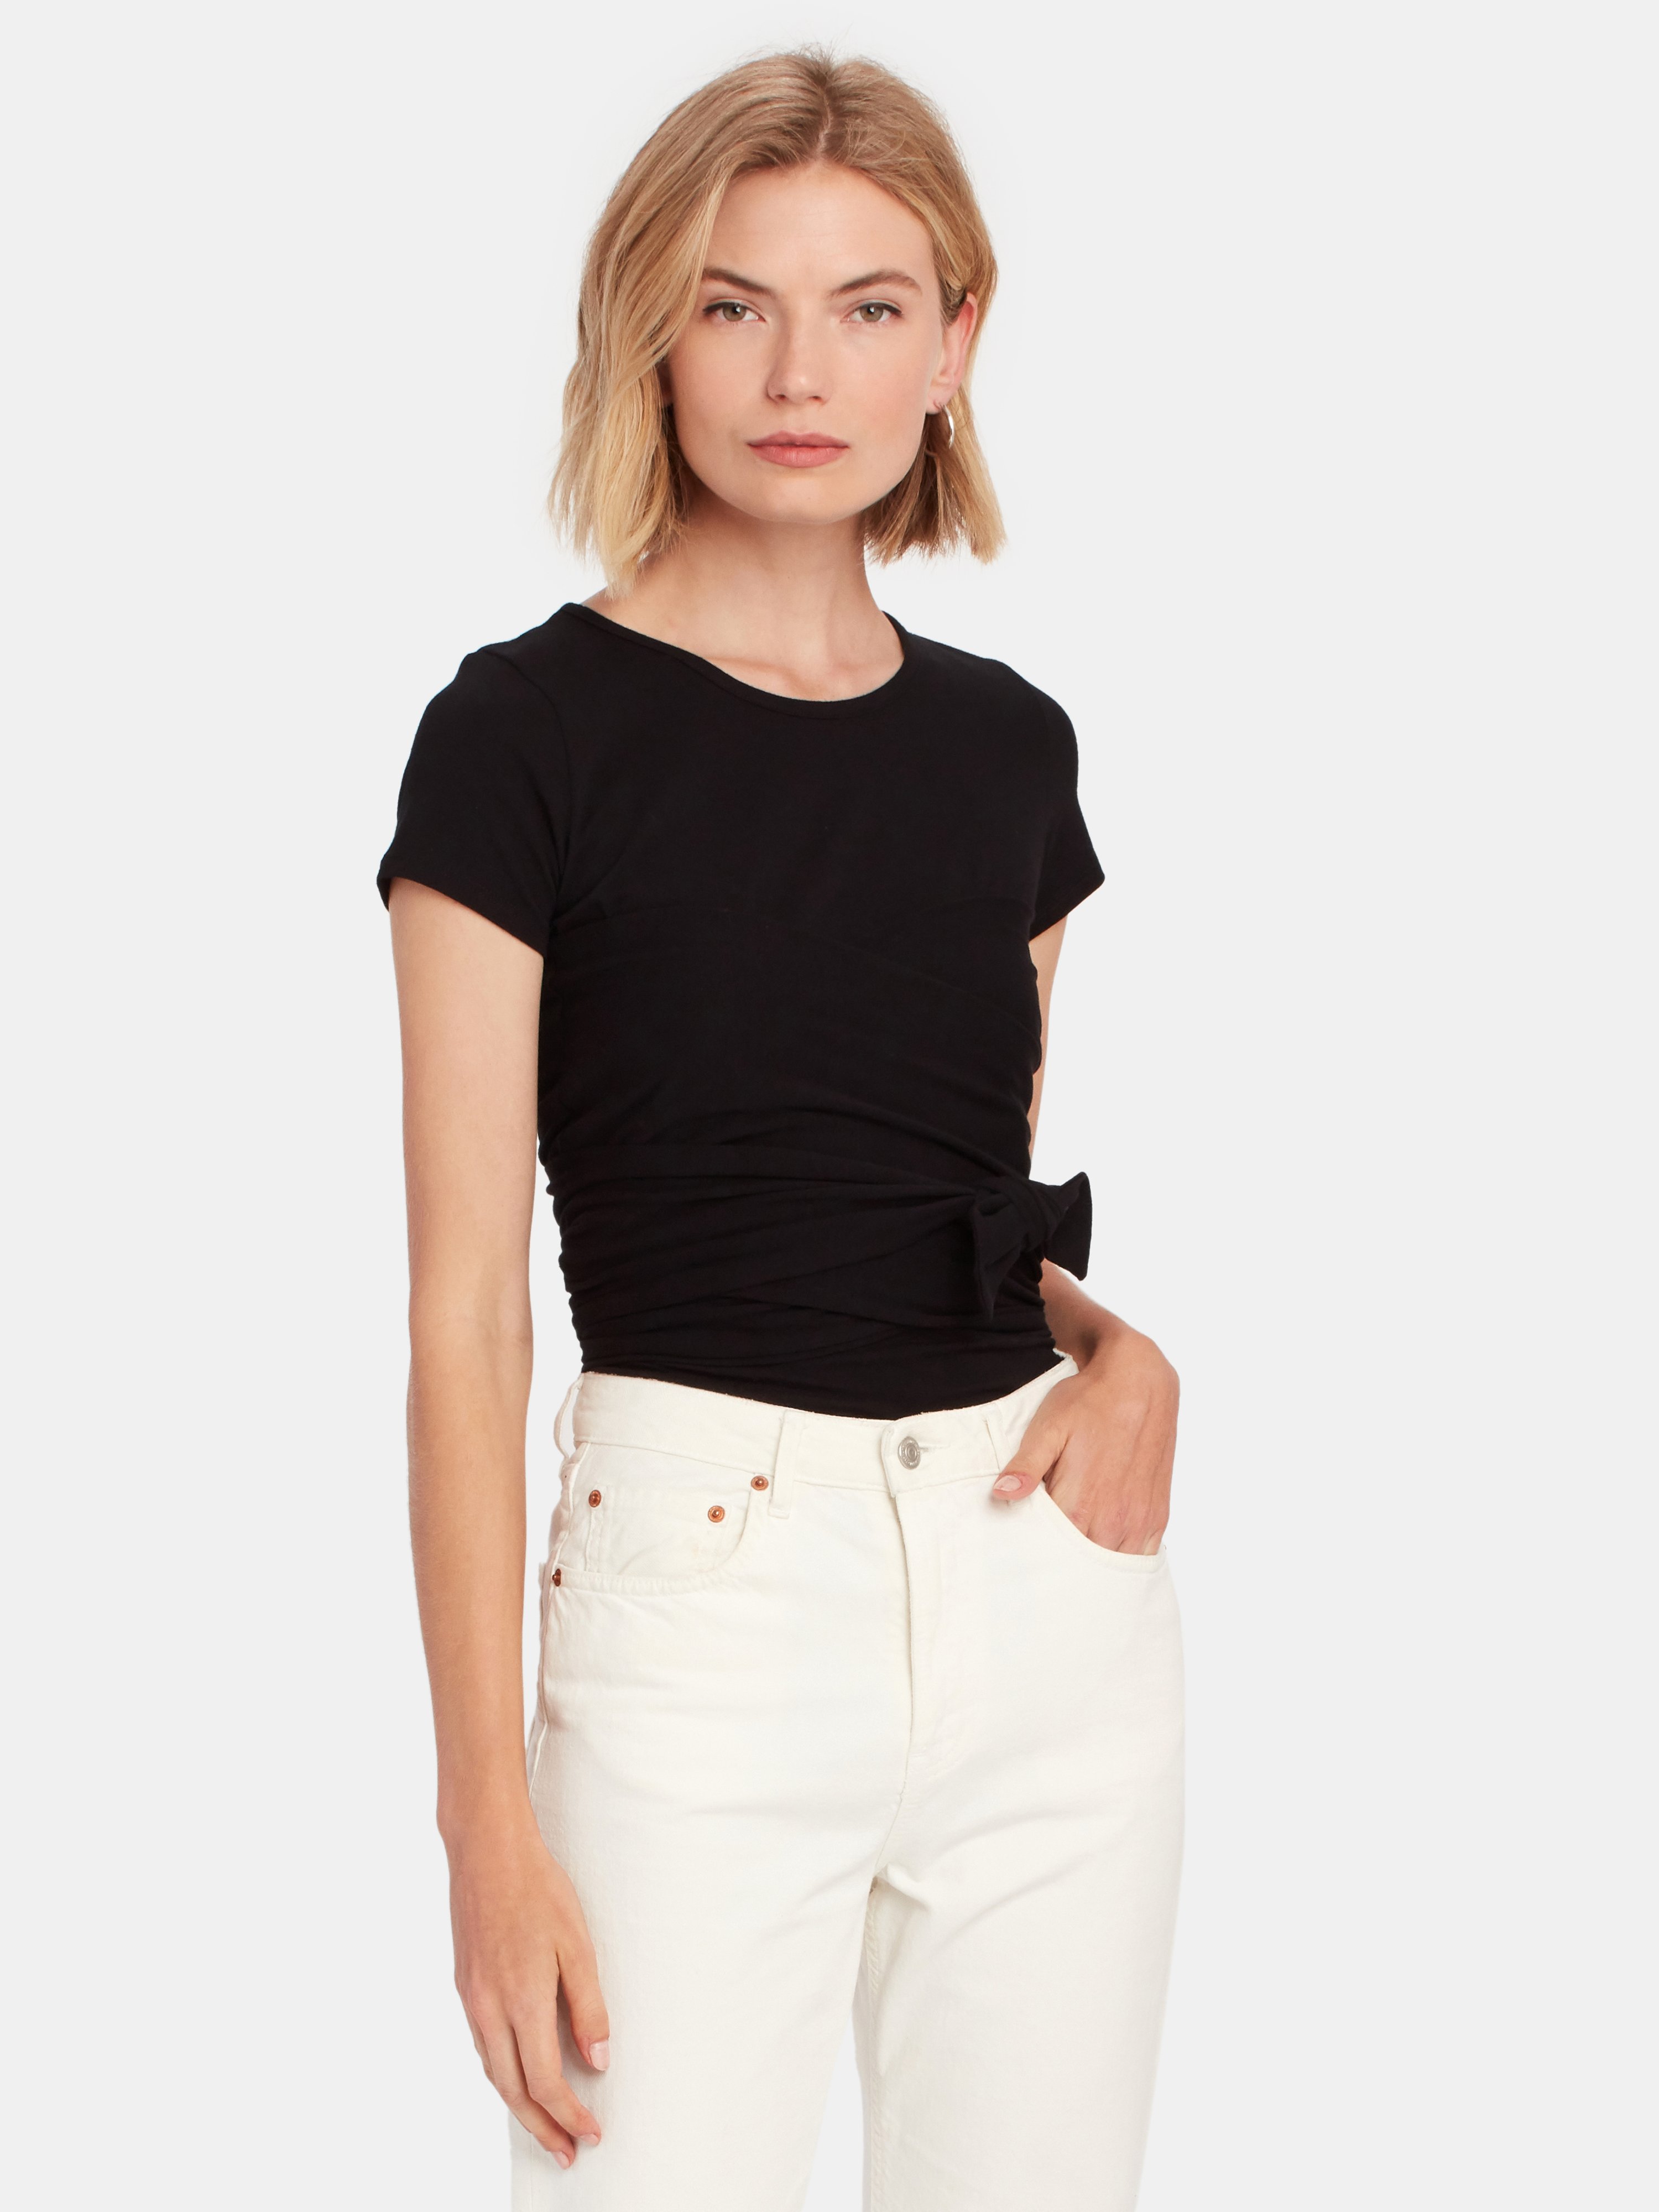 THE LINE BY K THE LINE BY K JEANNE WRAP T-SHIRT